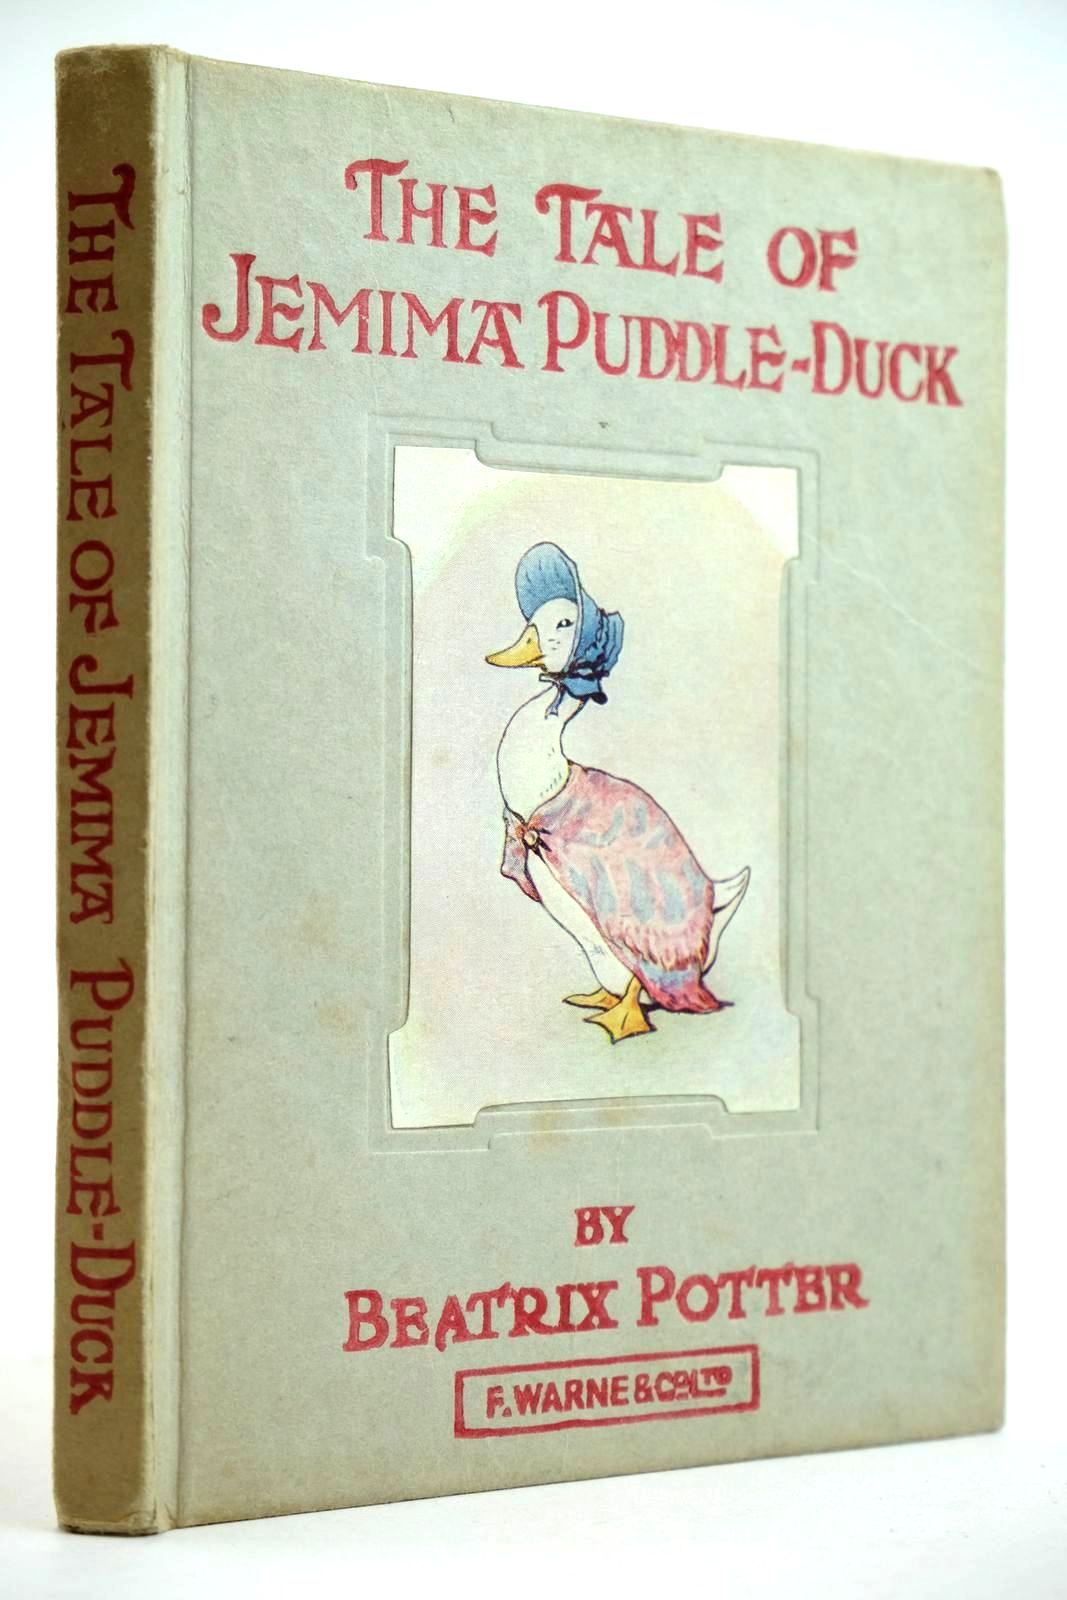 Photo of THE TALE OF JEMIMA PUDDLE-DUCK written by Potter, Beatrix illustrated by Potter, Beatrix published by Frederick Warne & Co Ltd. (STOCK CODE: 2132062)  for sale by Stella & Rose's Books